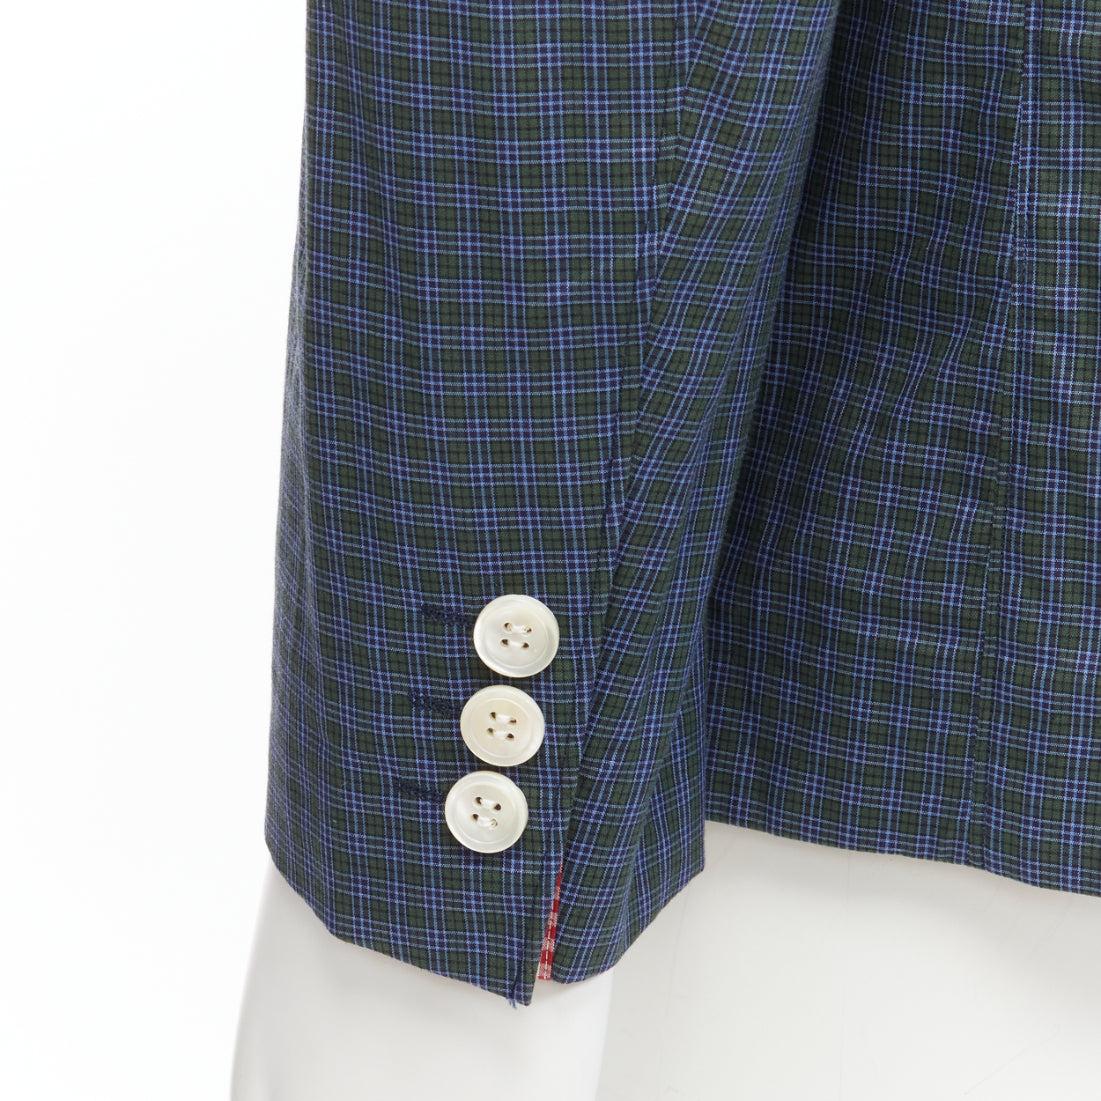 JUNYA WATANABE MAN blue green checked contrast lining casual blazer jacket M
Reference: JSLE/A00055
Brand: Junya Watanabe
Designer: Junya Watanabe
Collection: MAN
Material: Feels like cotton
Color: Green, Blue
Pattern: Plaid
Closure: Button
Lining: